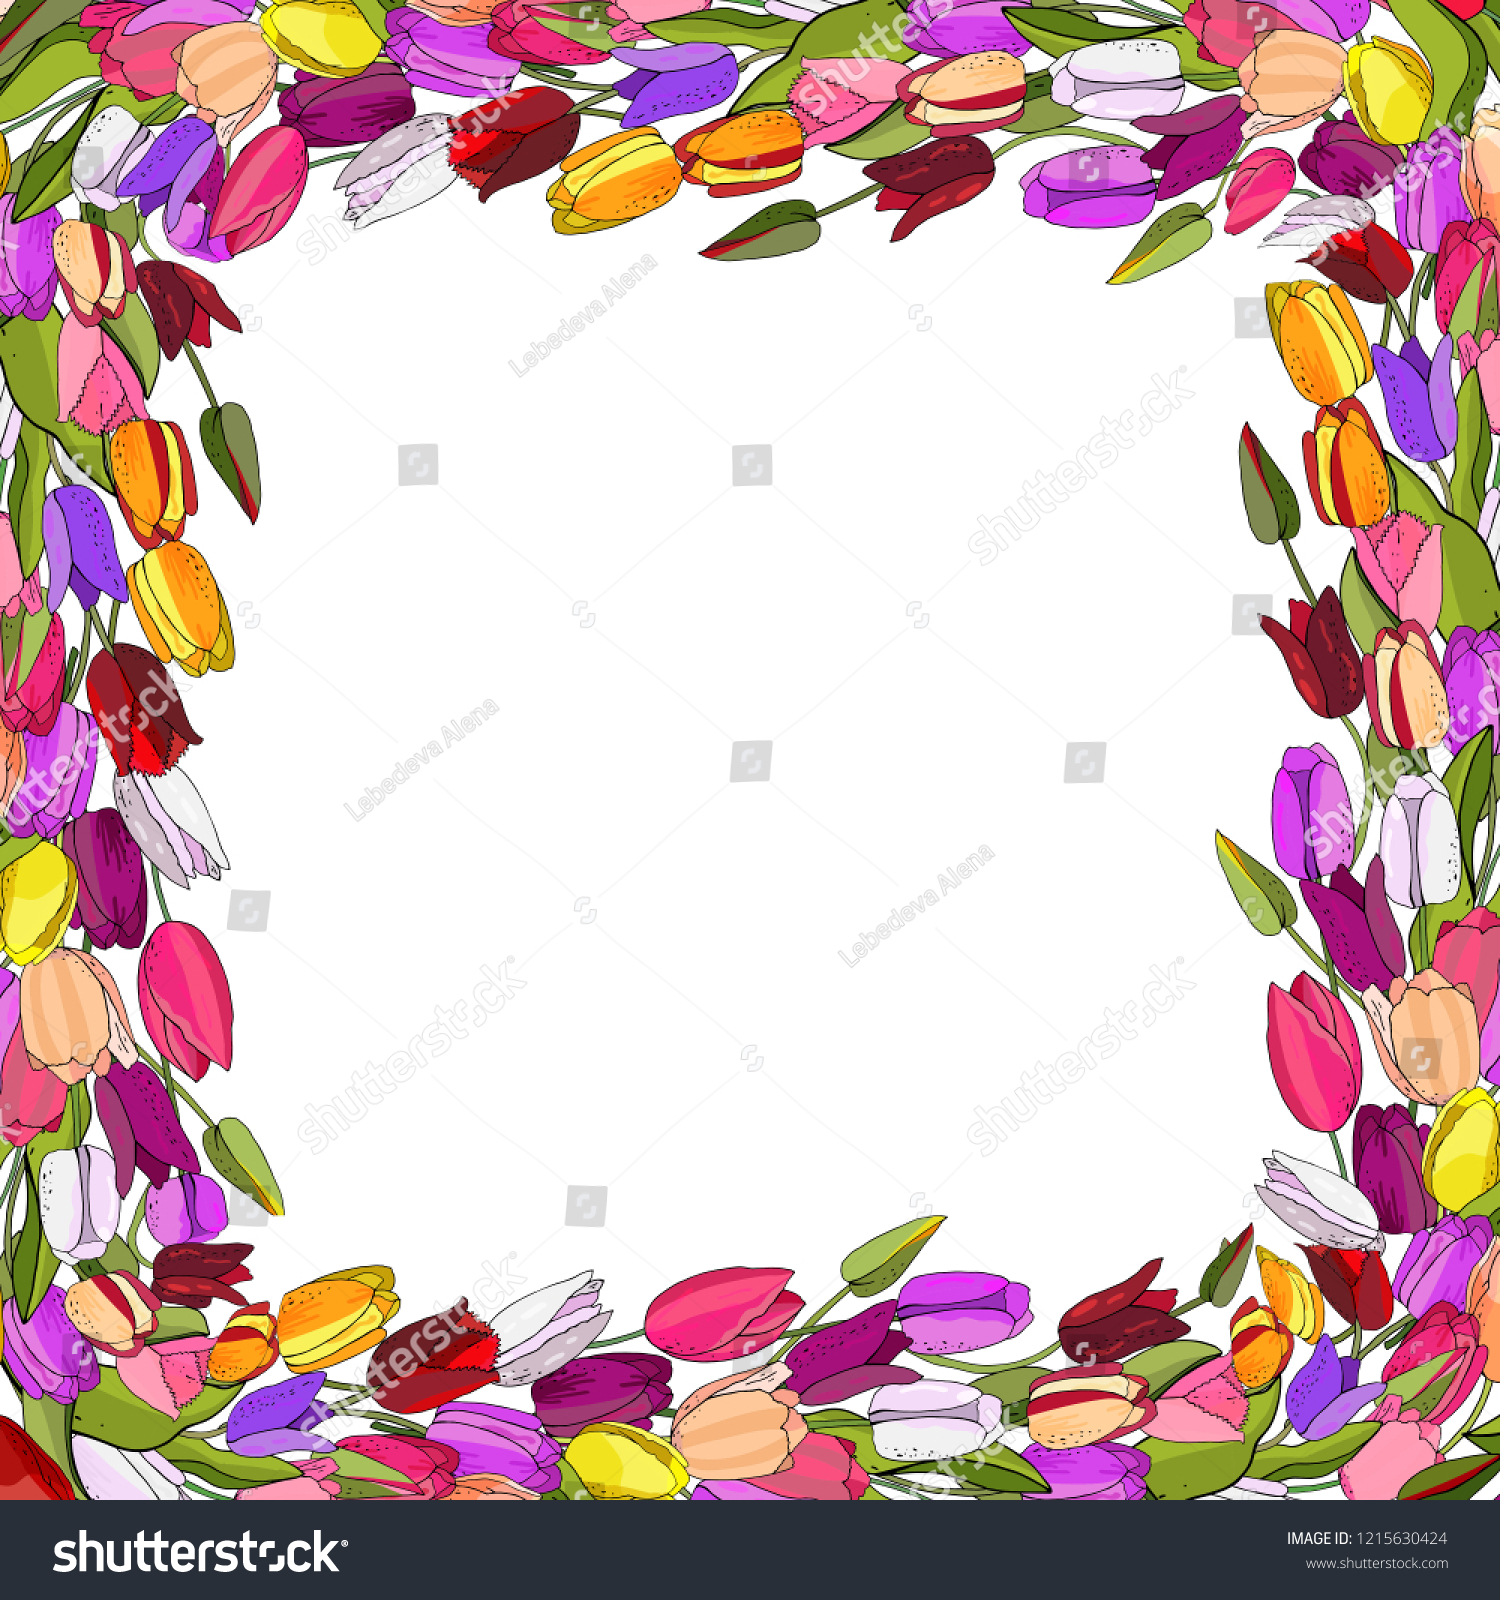 Flower Template Tulips Vector Hand Drawn Stock Vector (Royalty Free ...